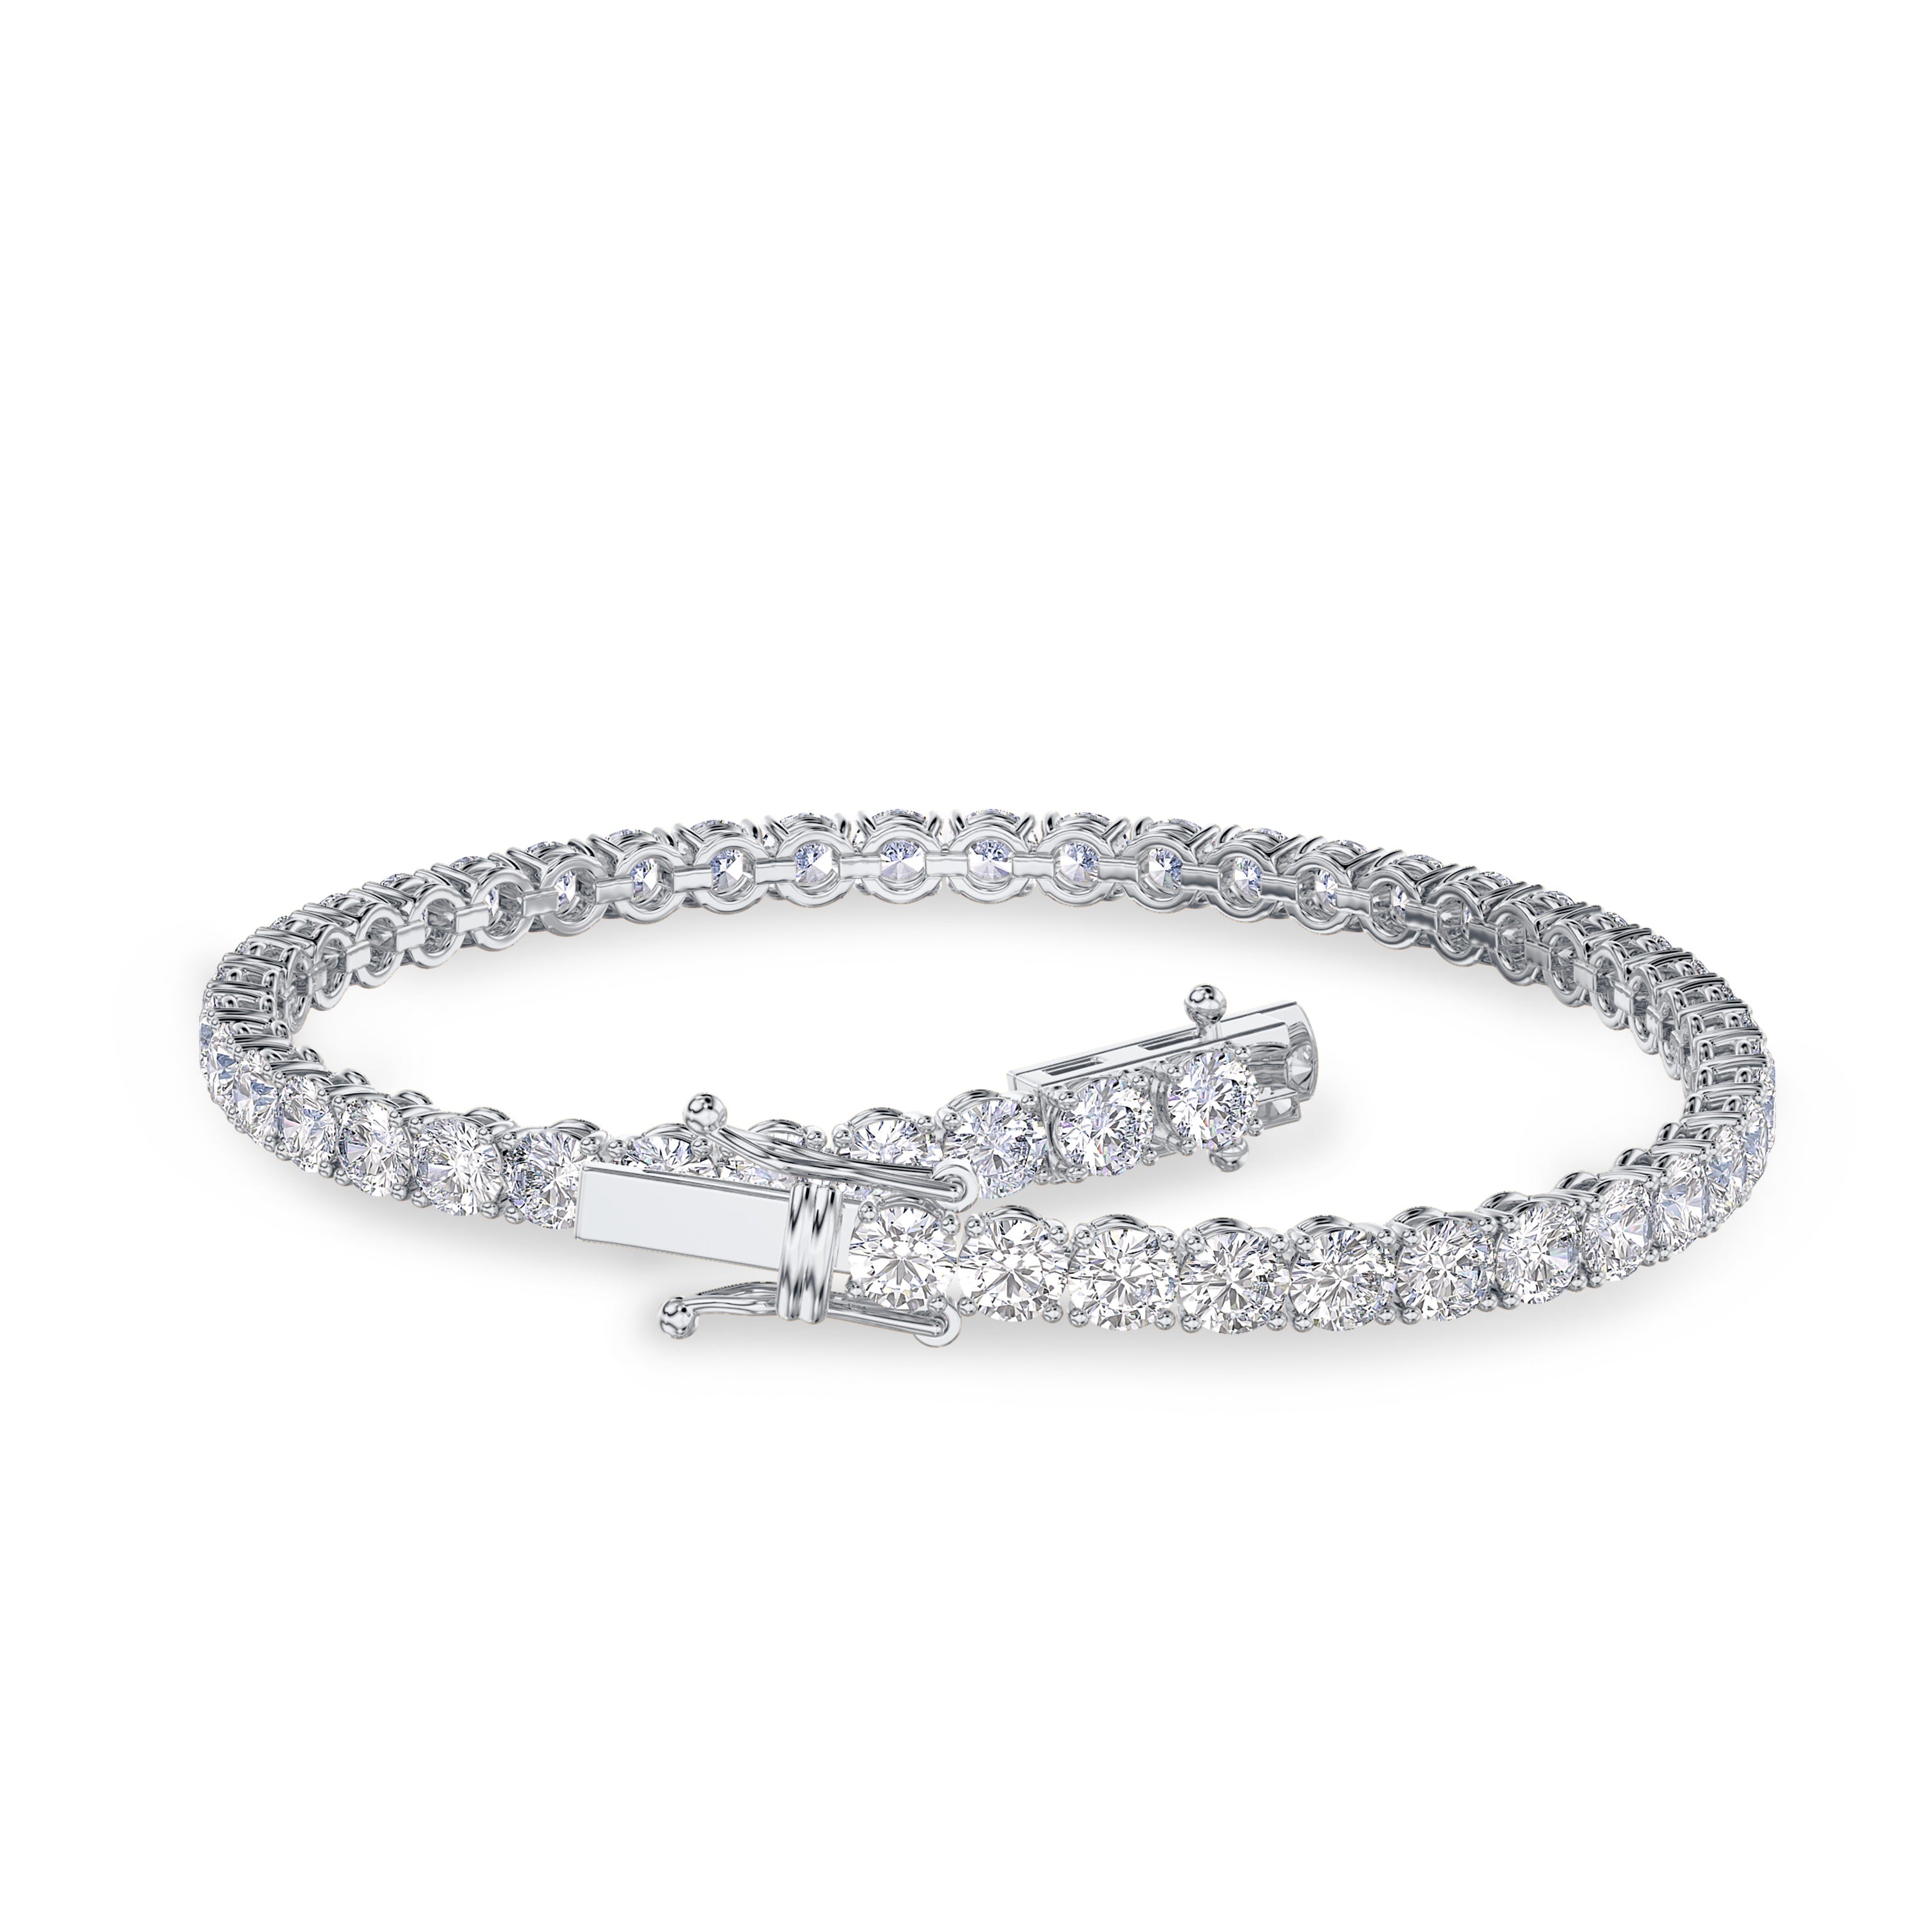 7.31 carat tennis bracelet in 18K Gold, FG color and SI clarity